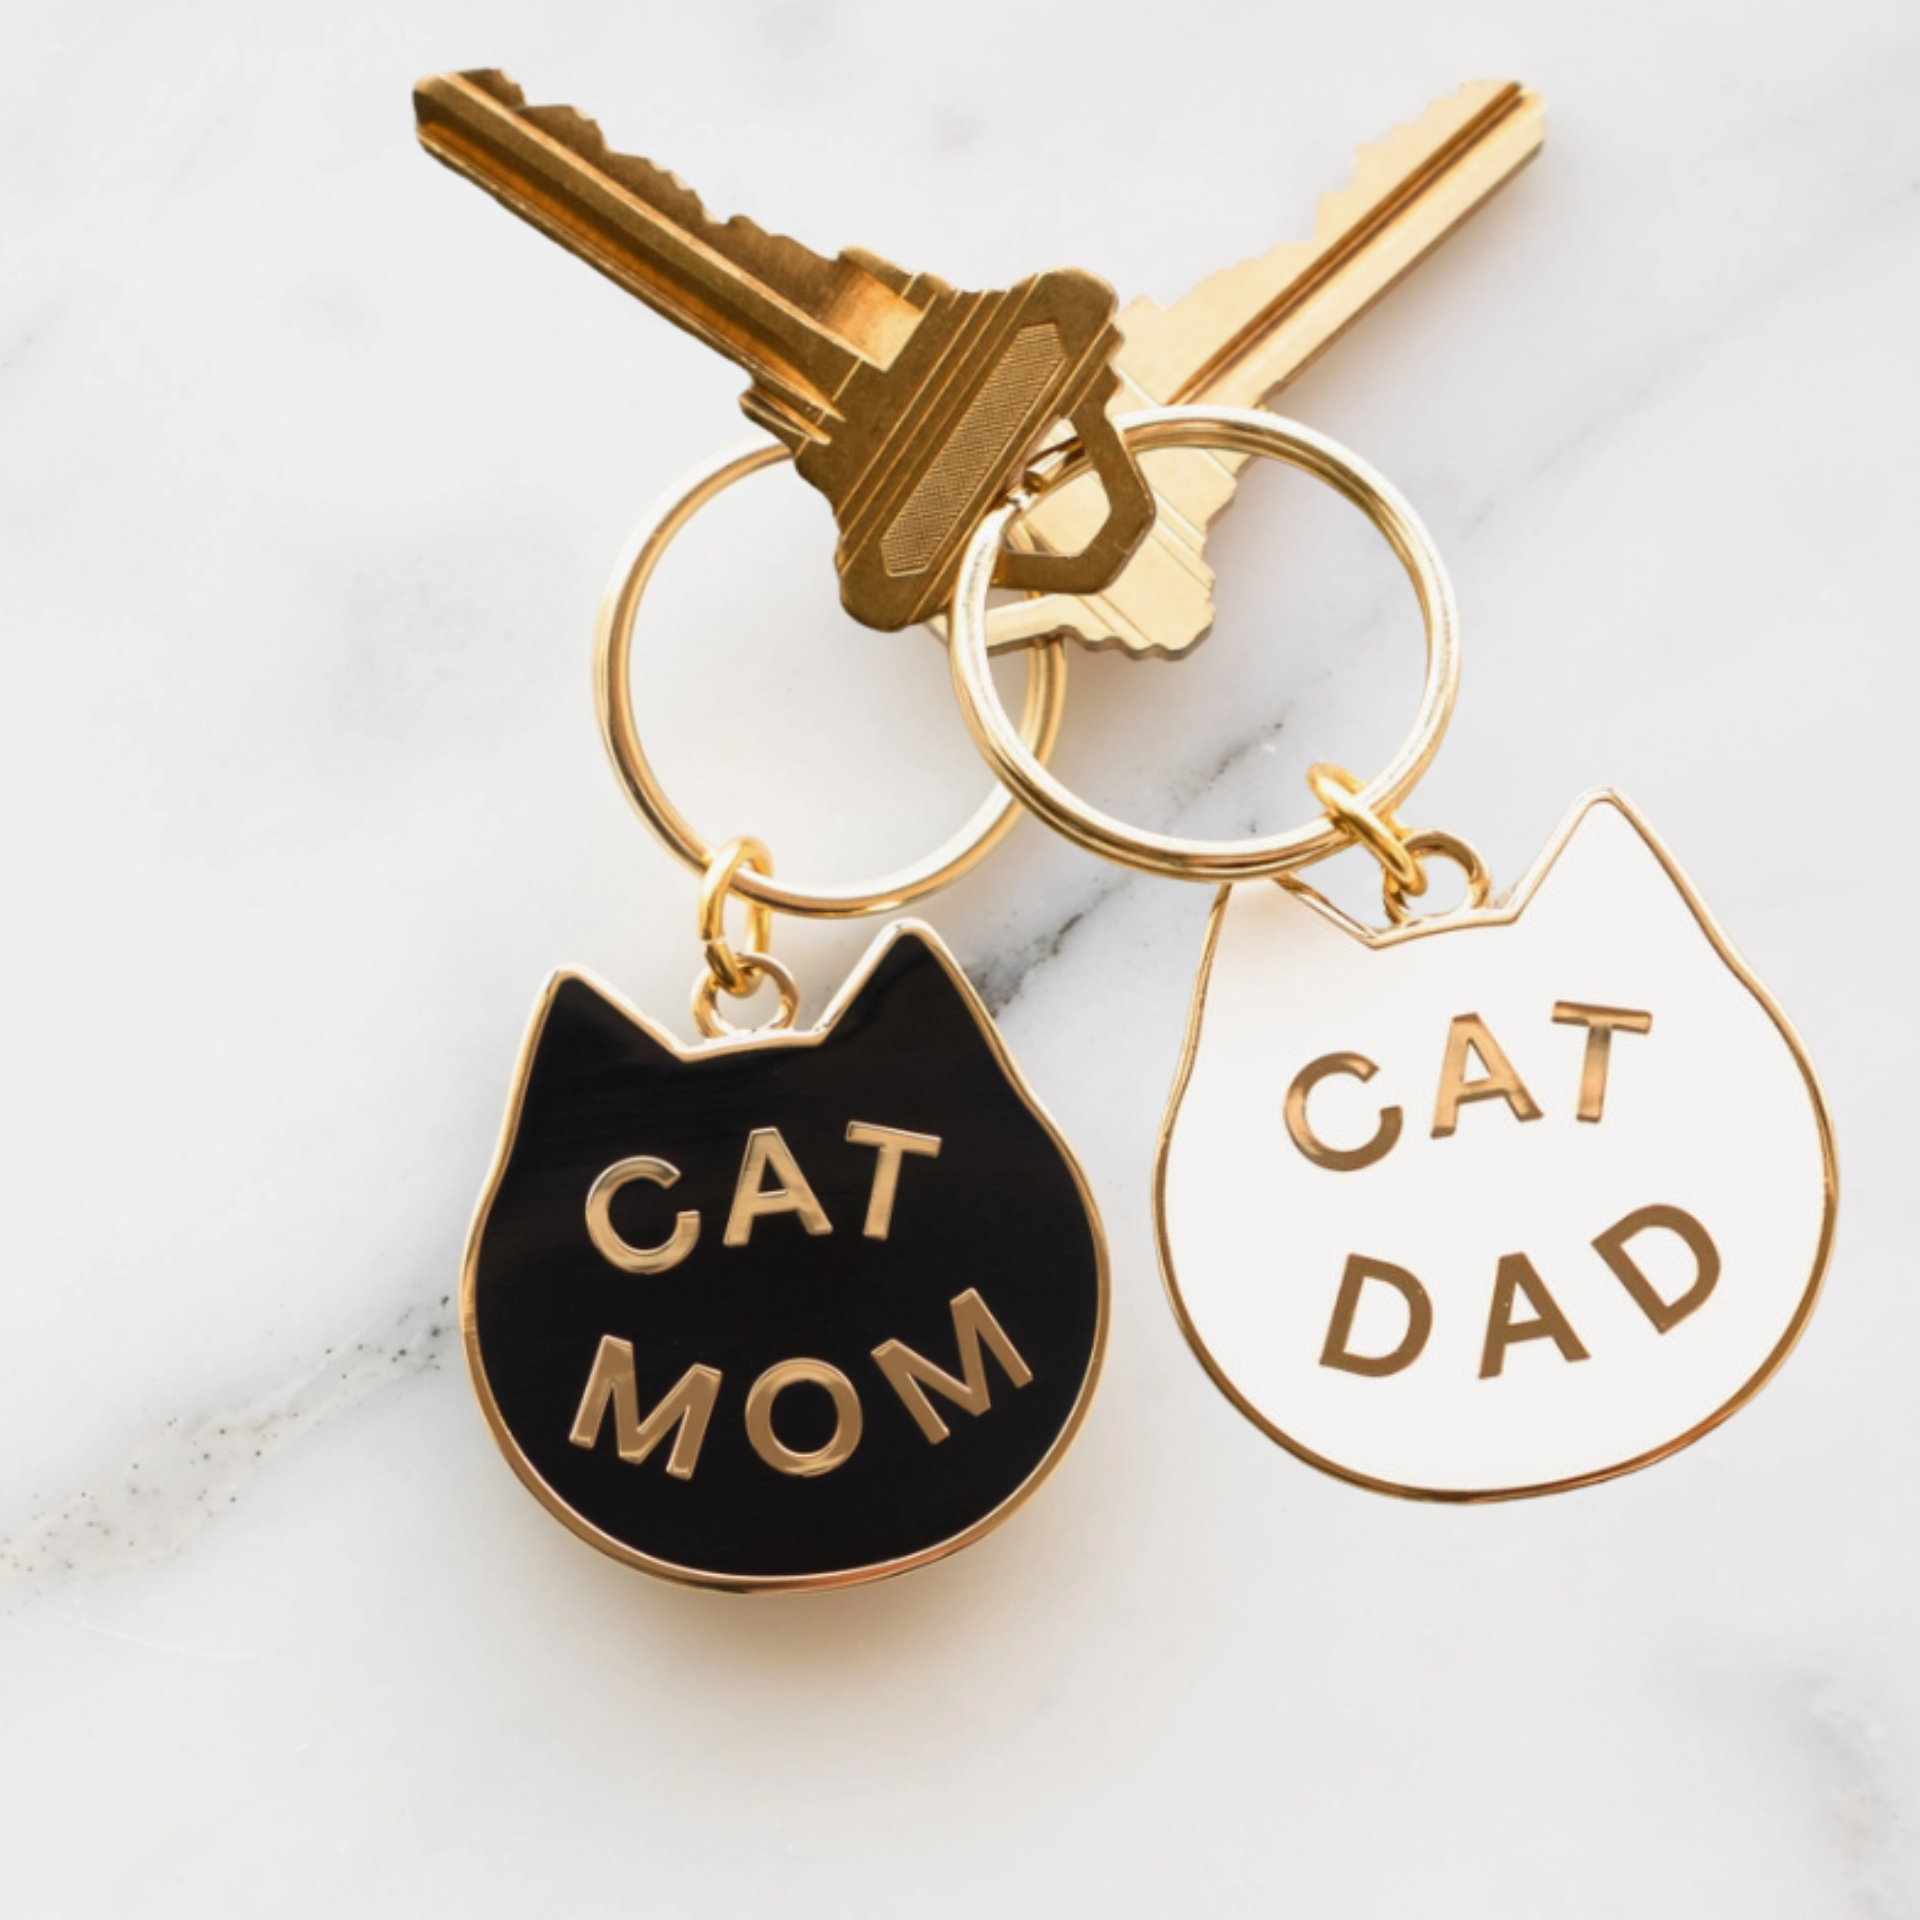 Gifts For Cat Owners, Cat Mom And Dad Keychains Set